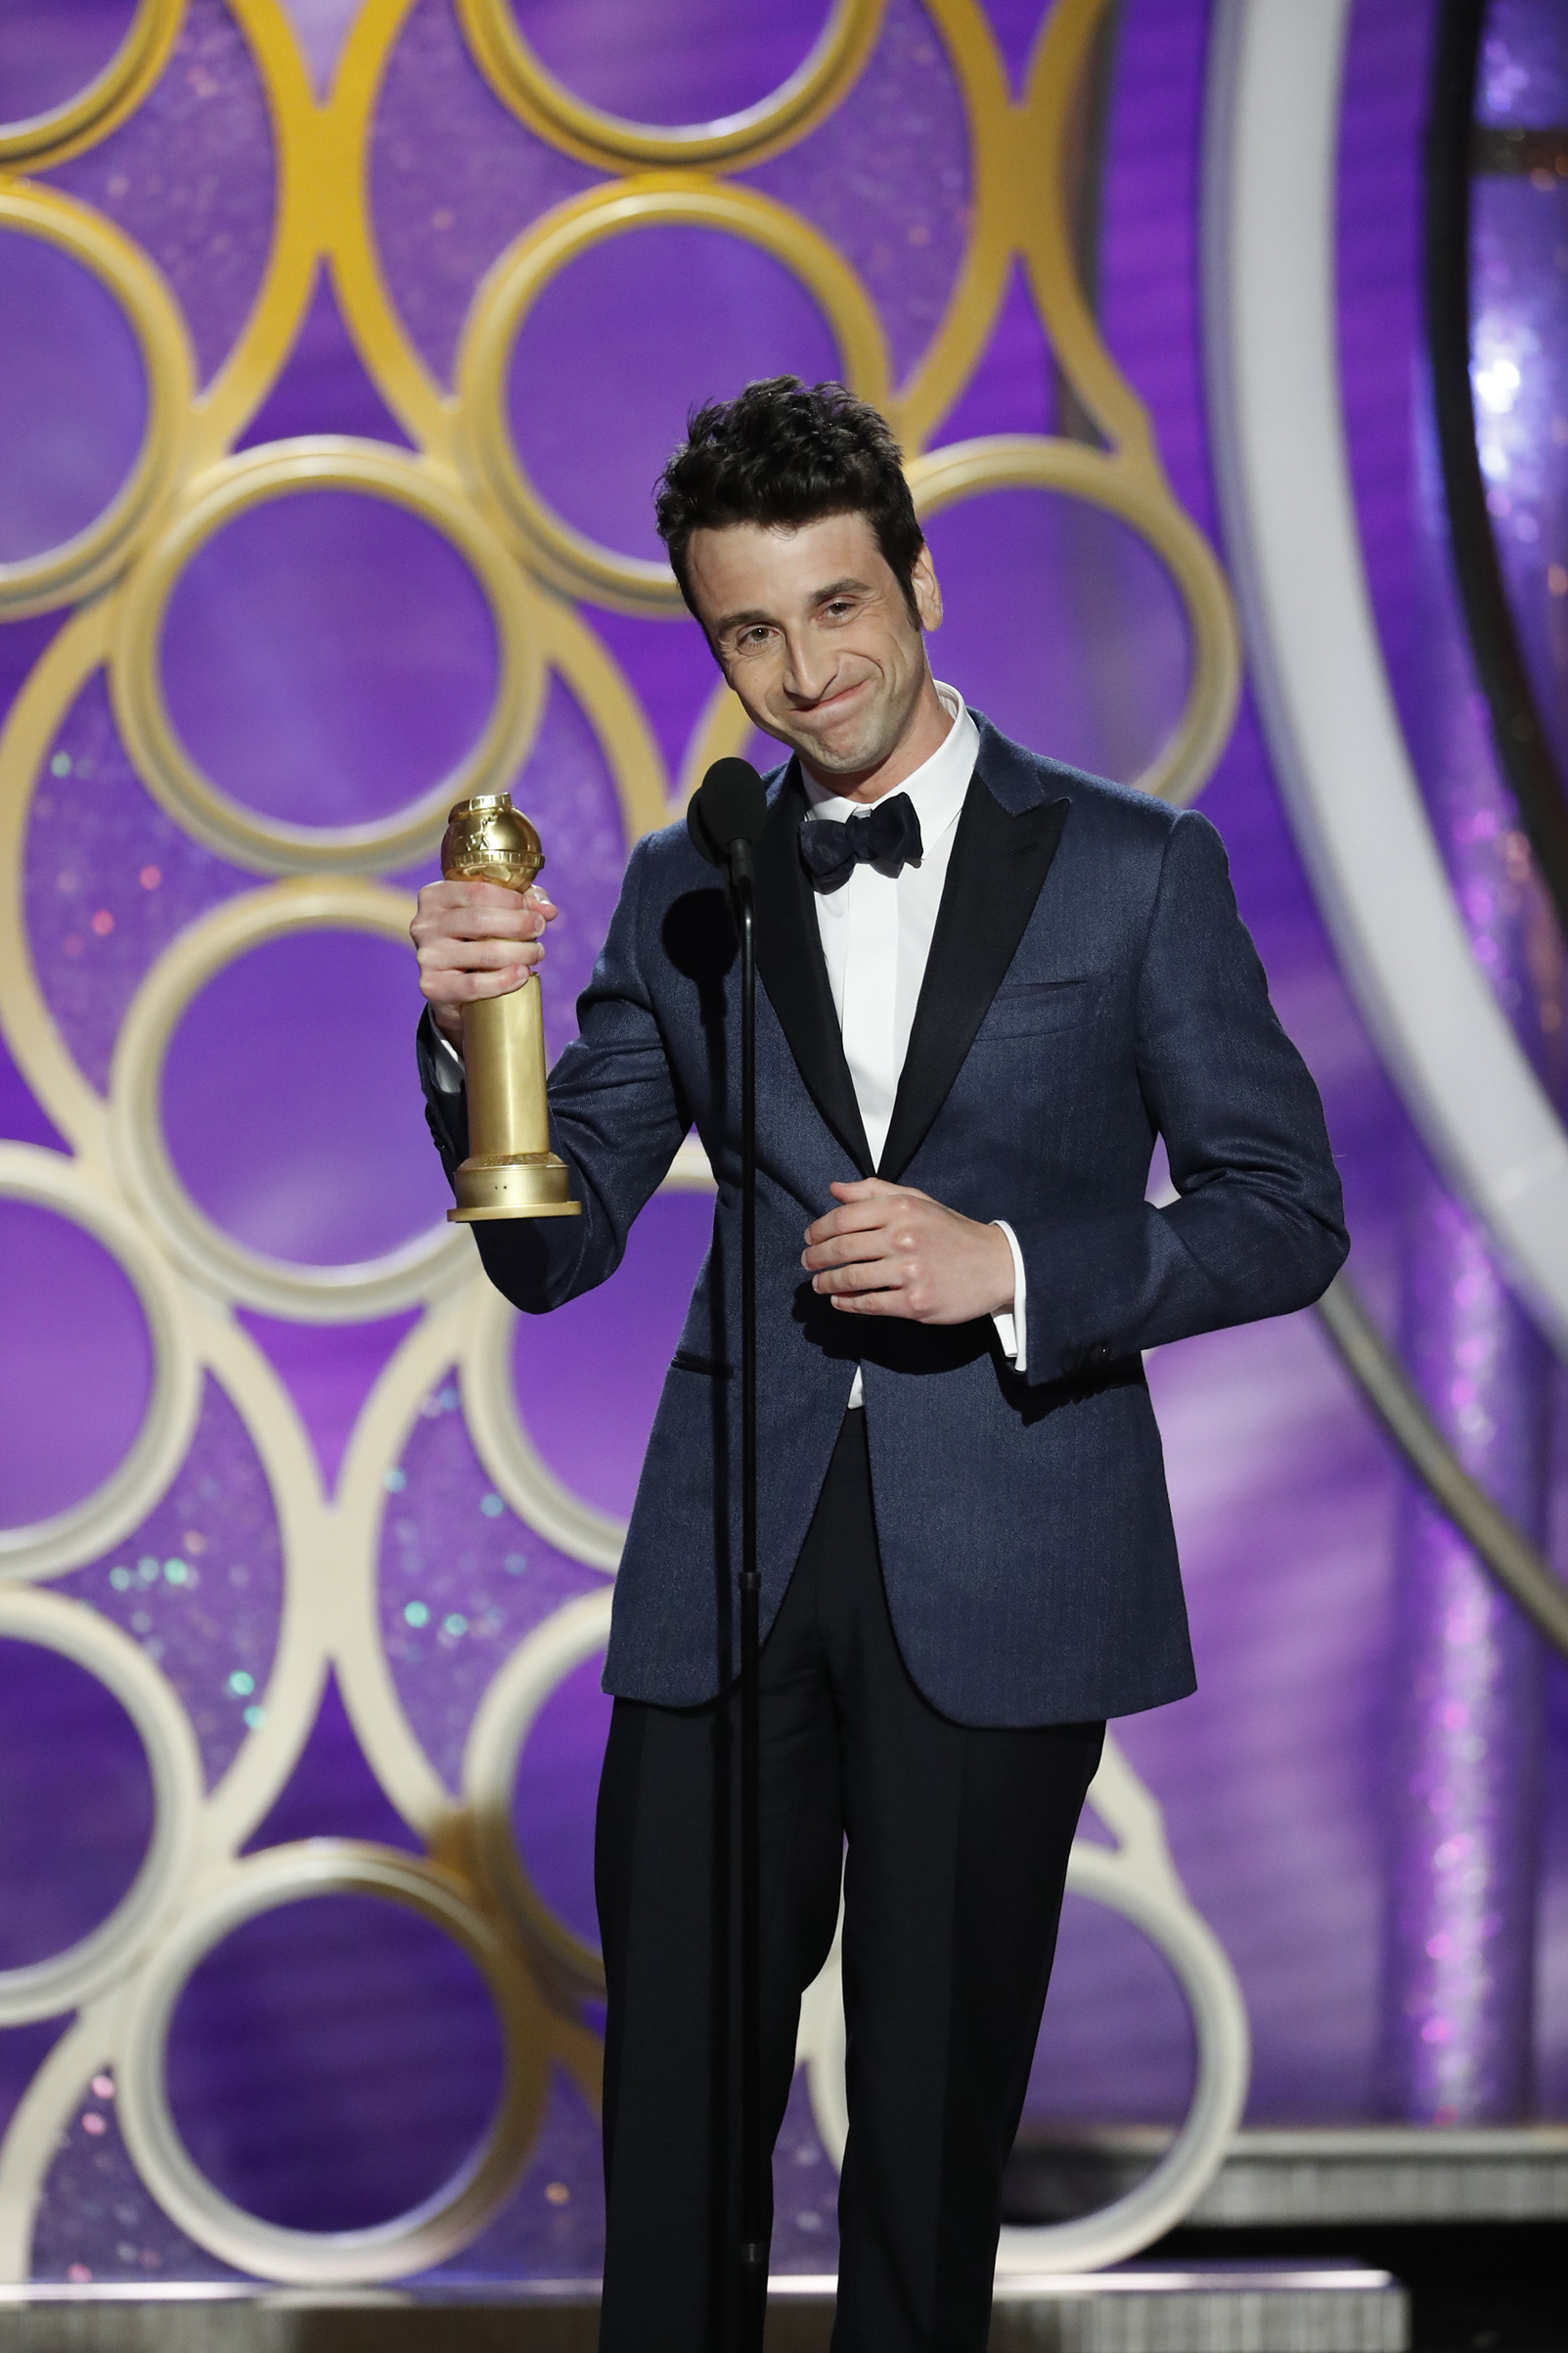 Justin Hurwitz from “First Man” accepts the Best Original Score - Motion Picture award onstage during the 76th Annual Golden Globe Awards.